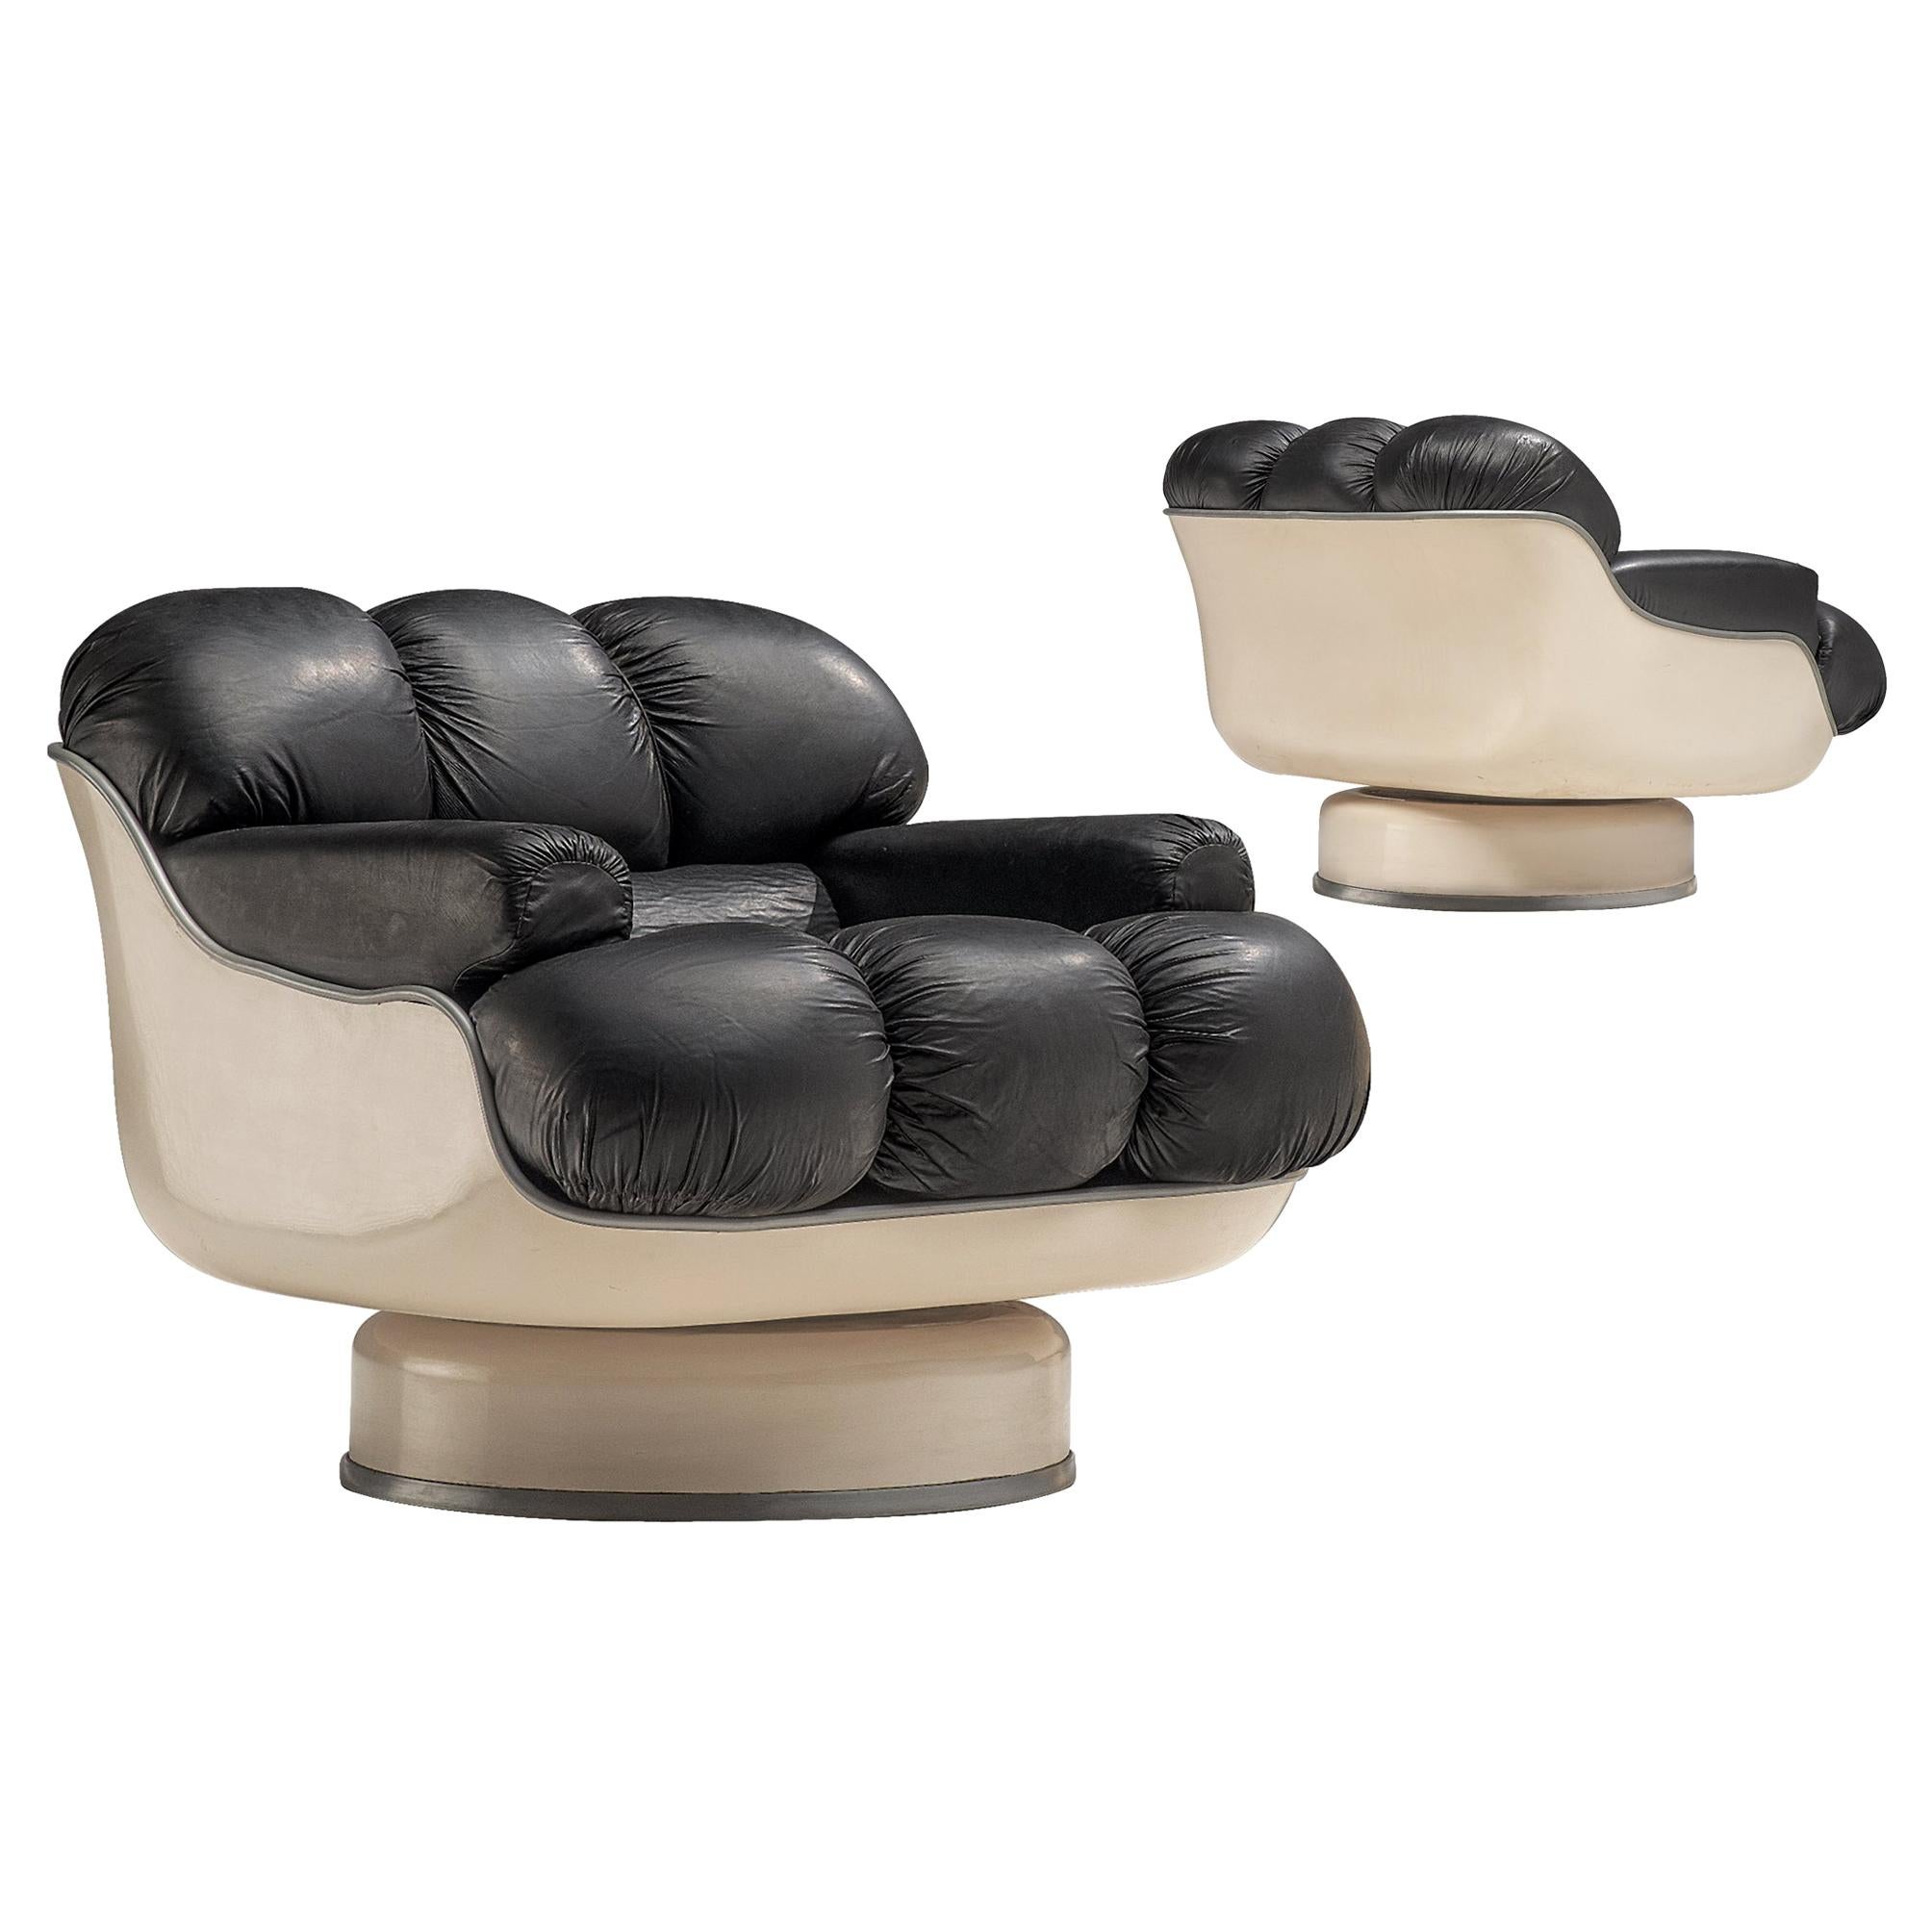 Set of Lounge Chairs in Fiberglass and Black Leatherette, France, 1970s